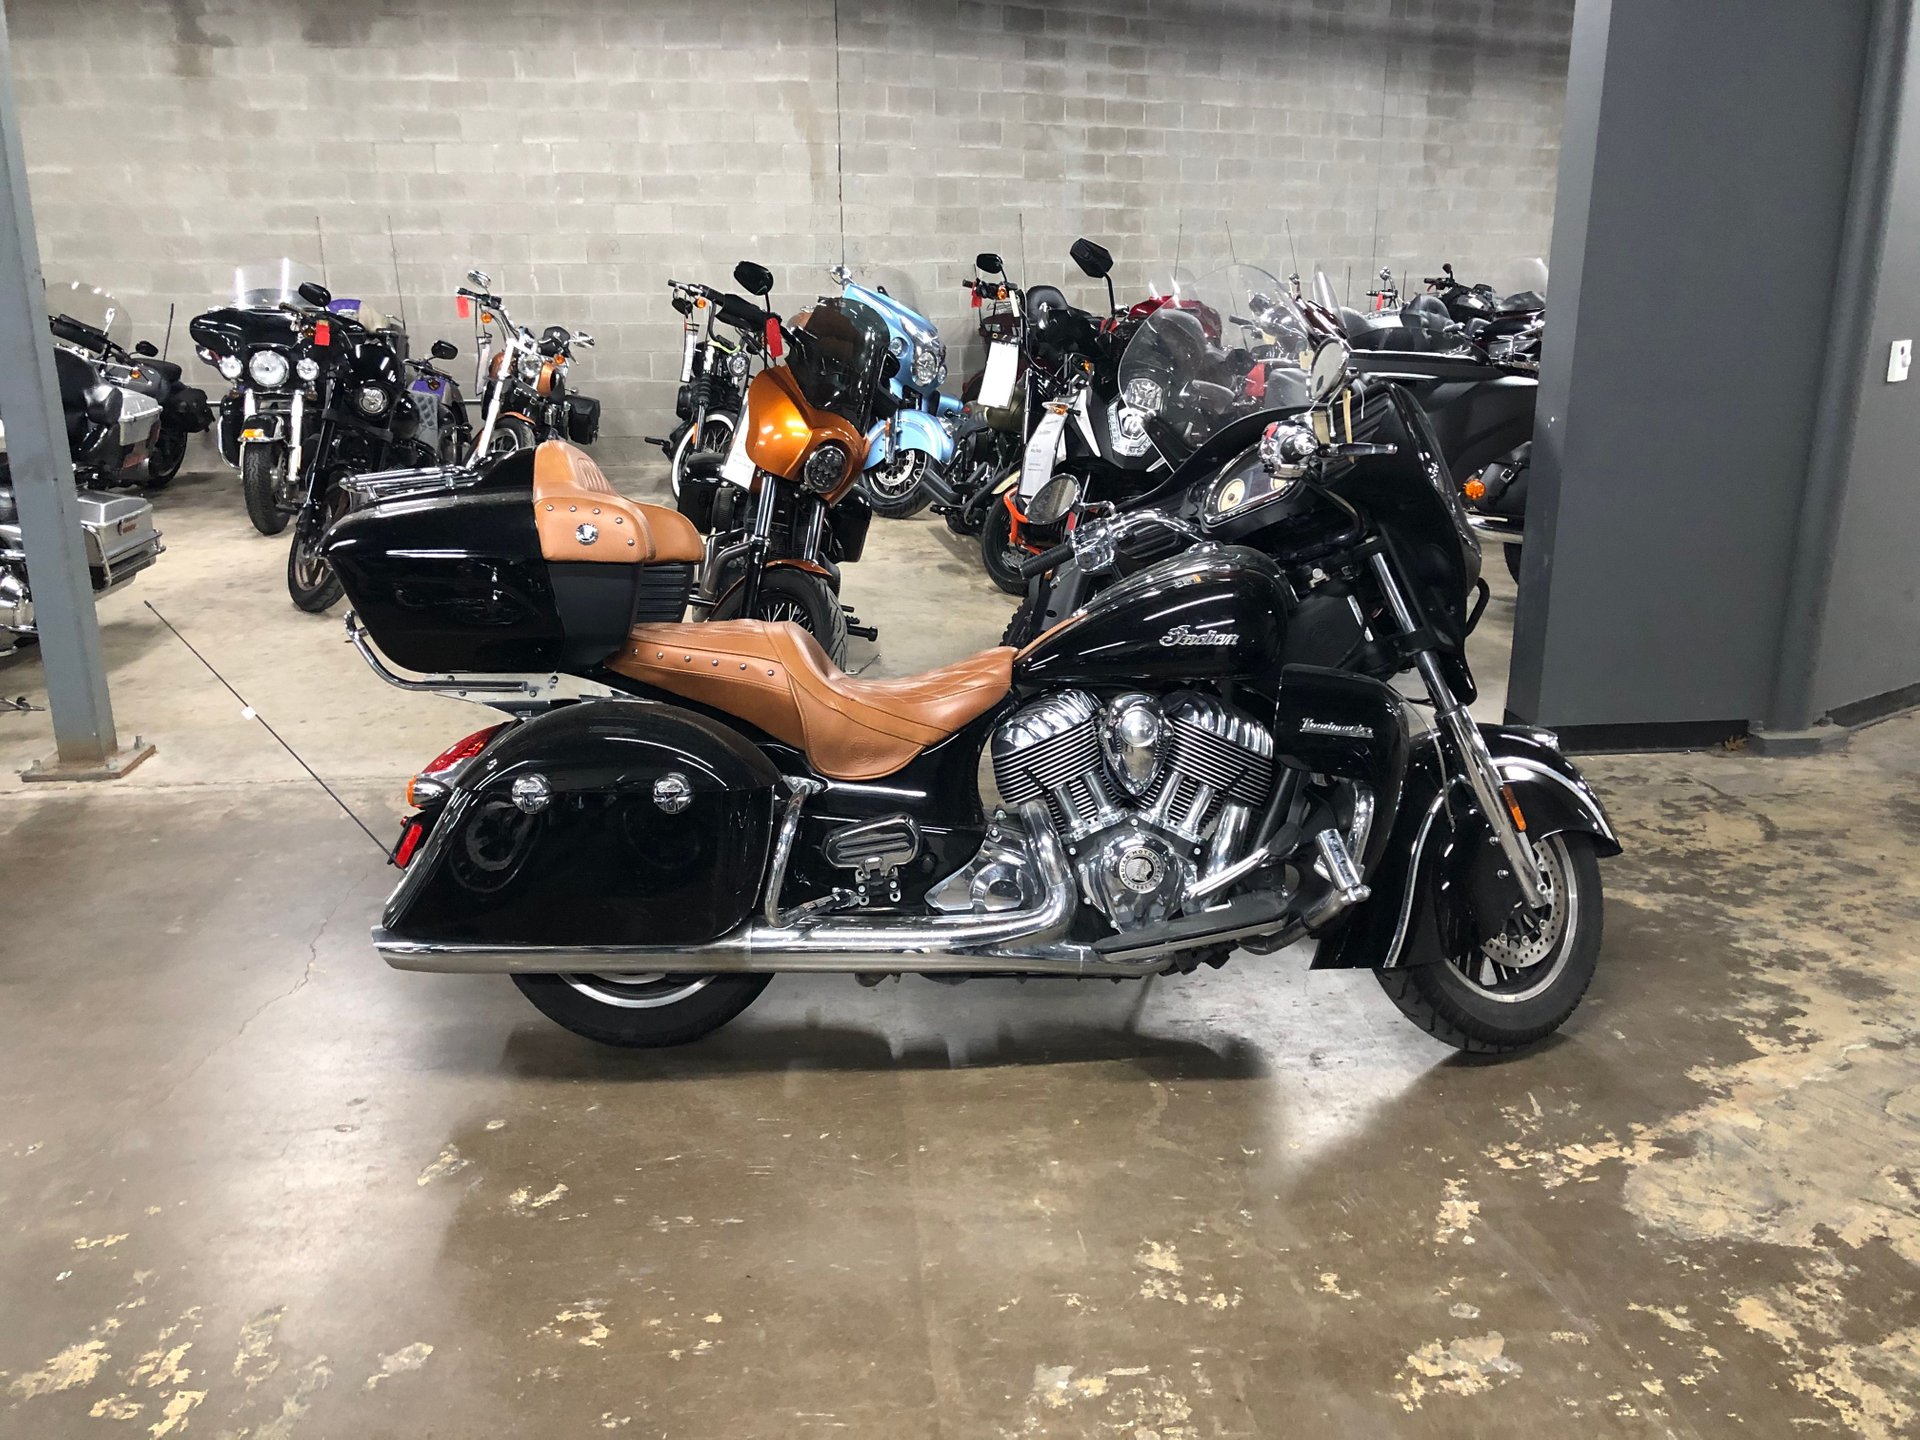 2015 Indian Roadmaster American Motorcycle Trading Company Used Harley Davidson Motorcycles